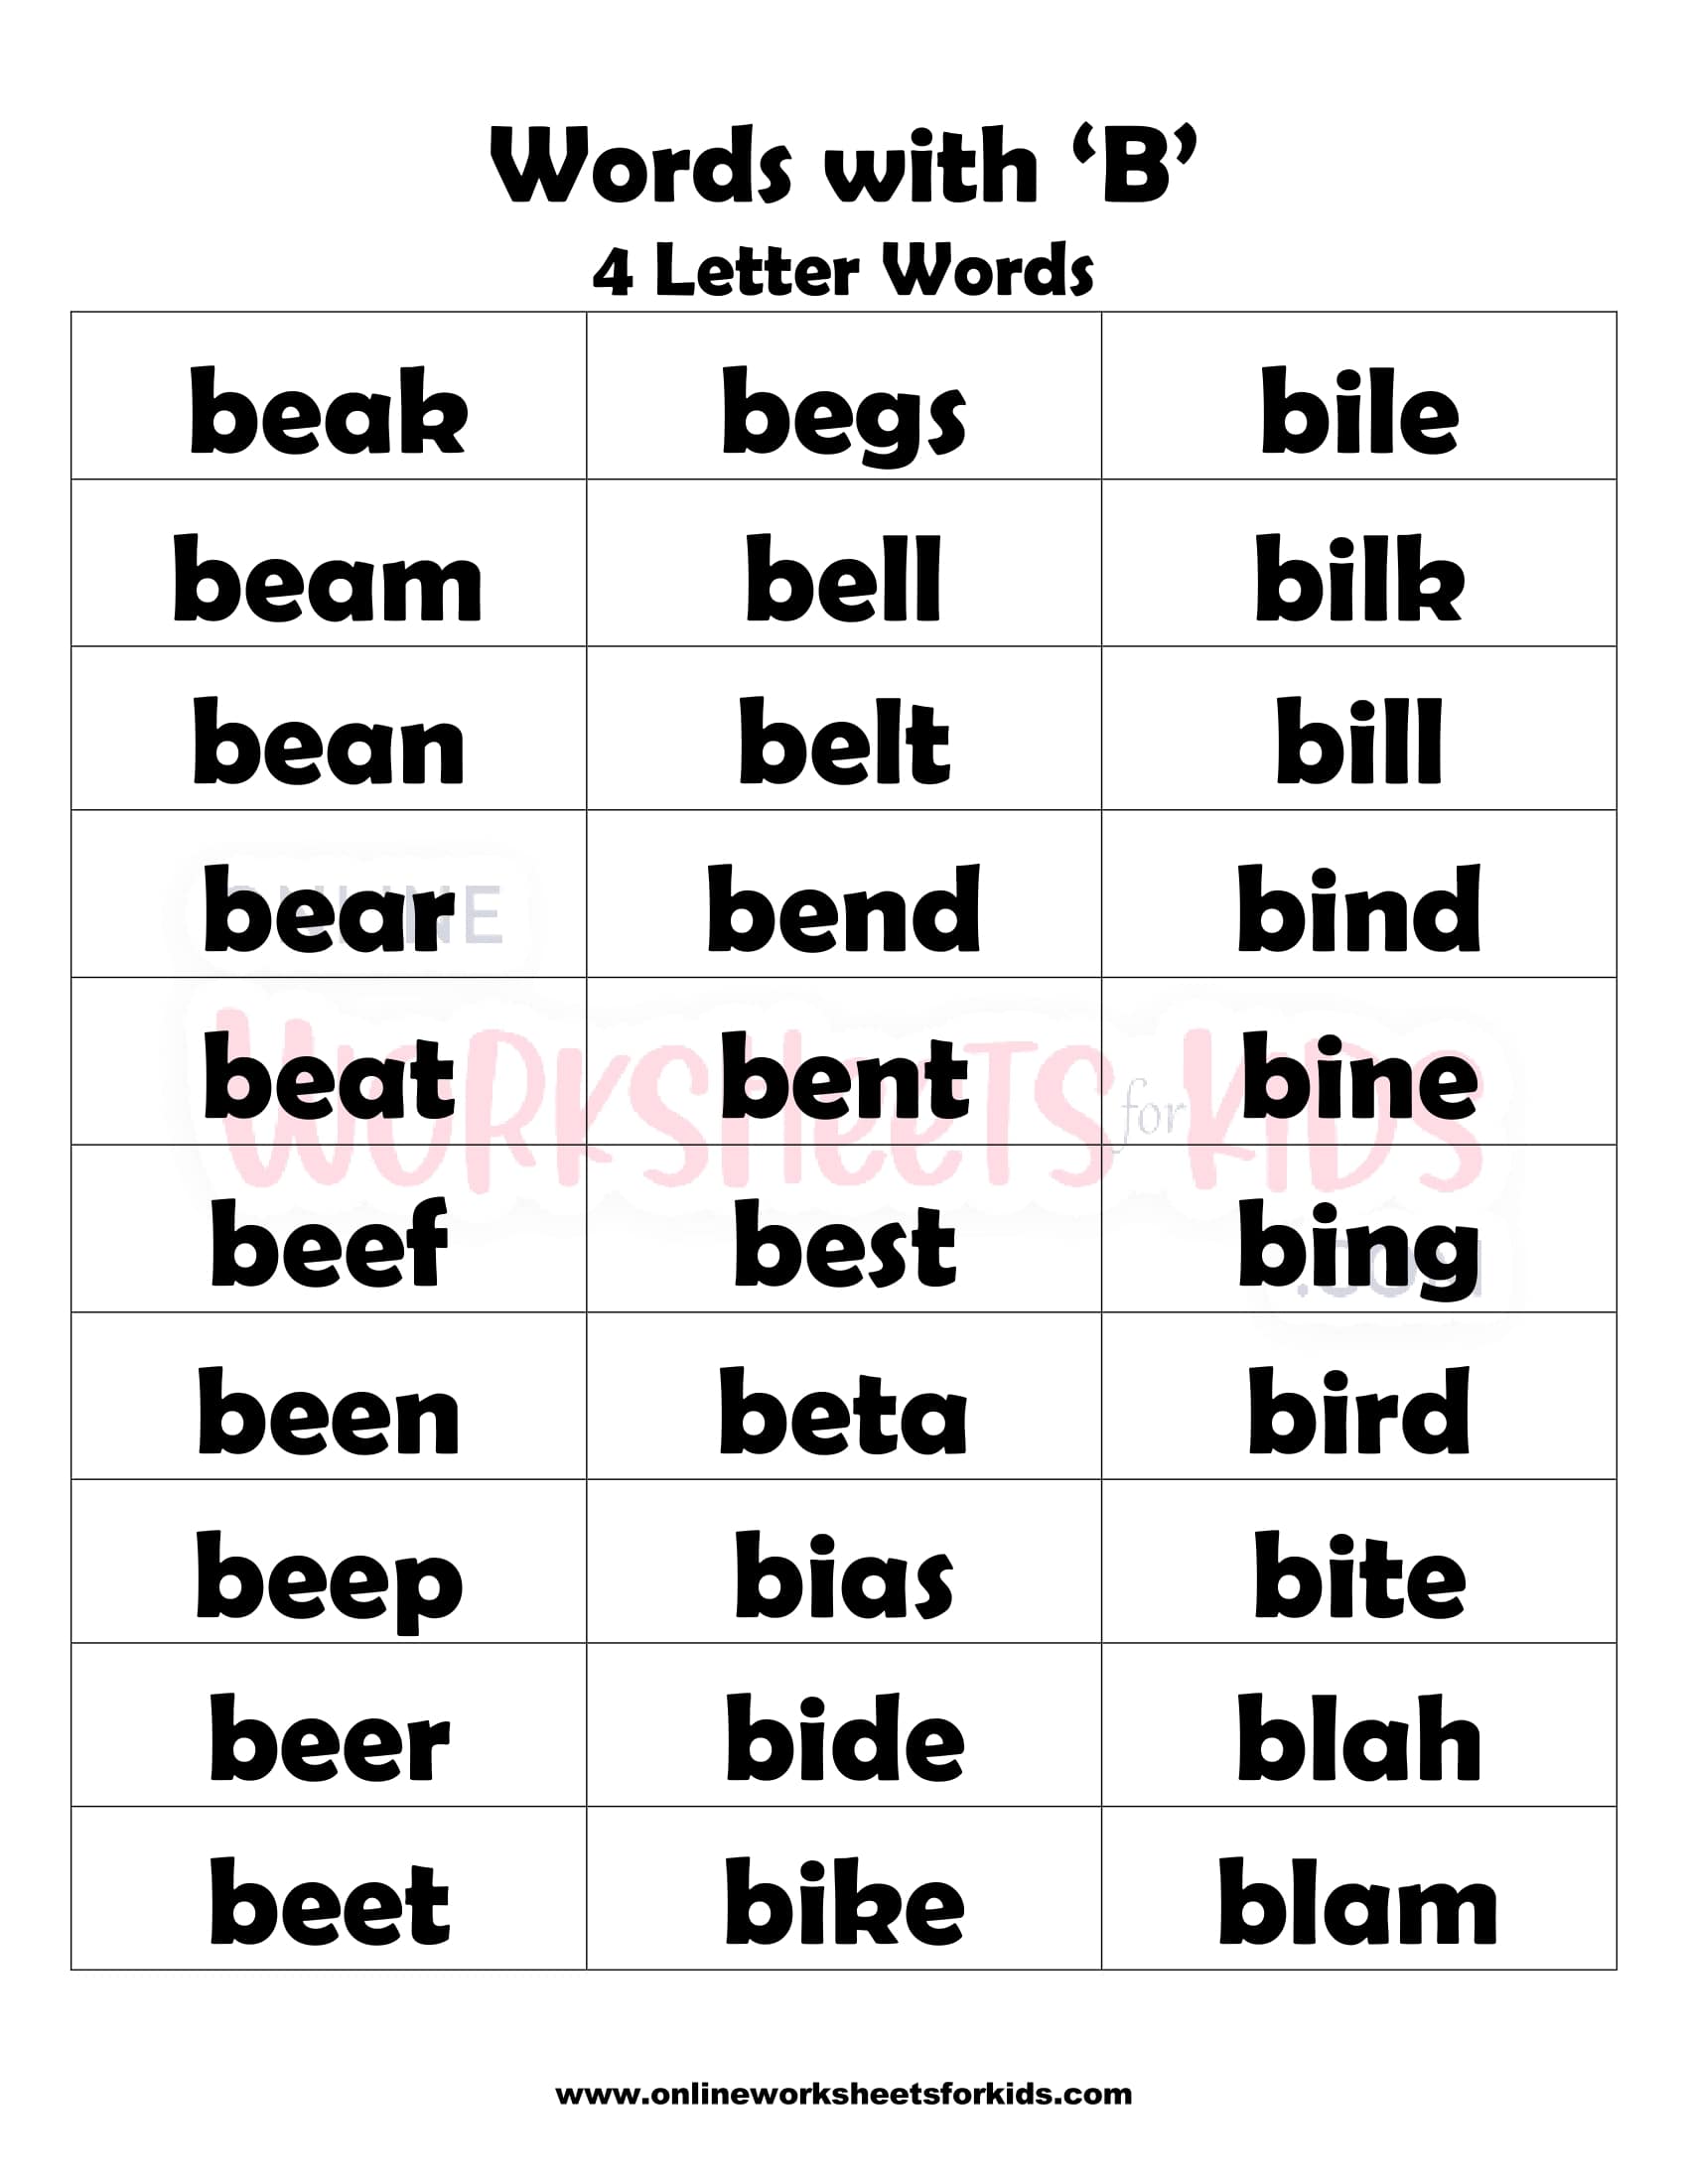 List of Words That Start With Letter 'B' For Children